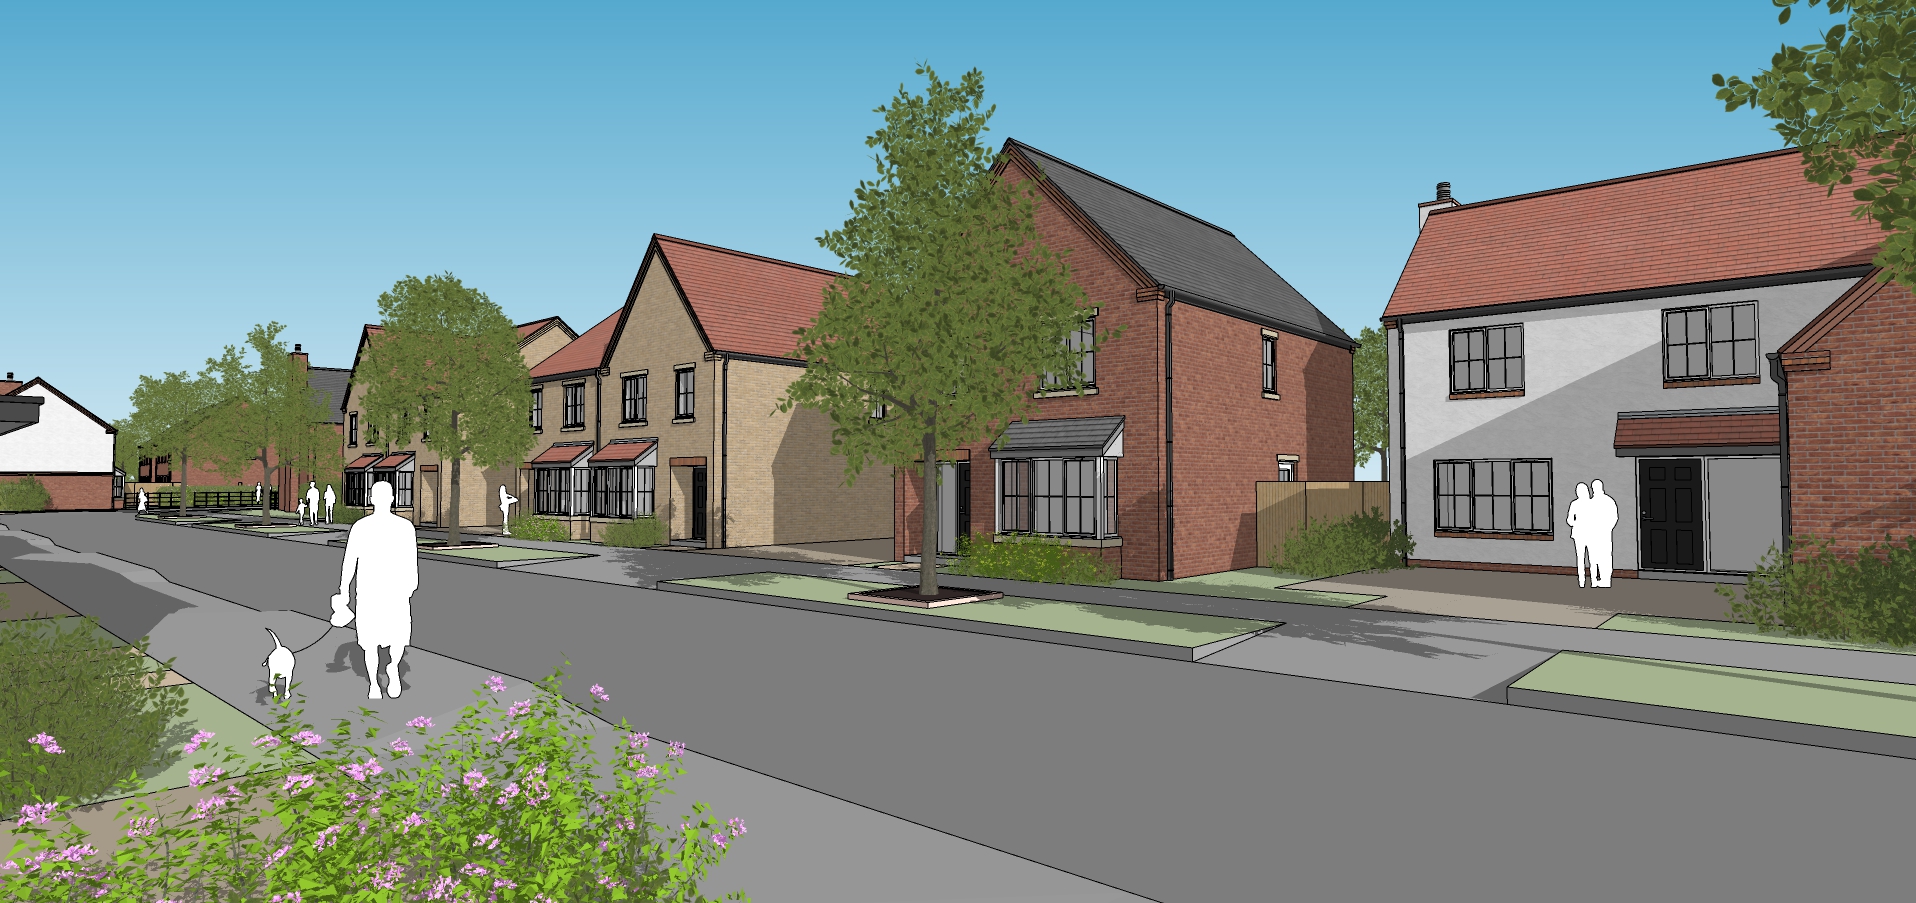 Taggart Homes unveils plans for UK expansion @TaggartHomes